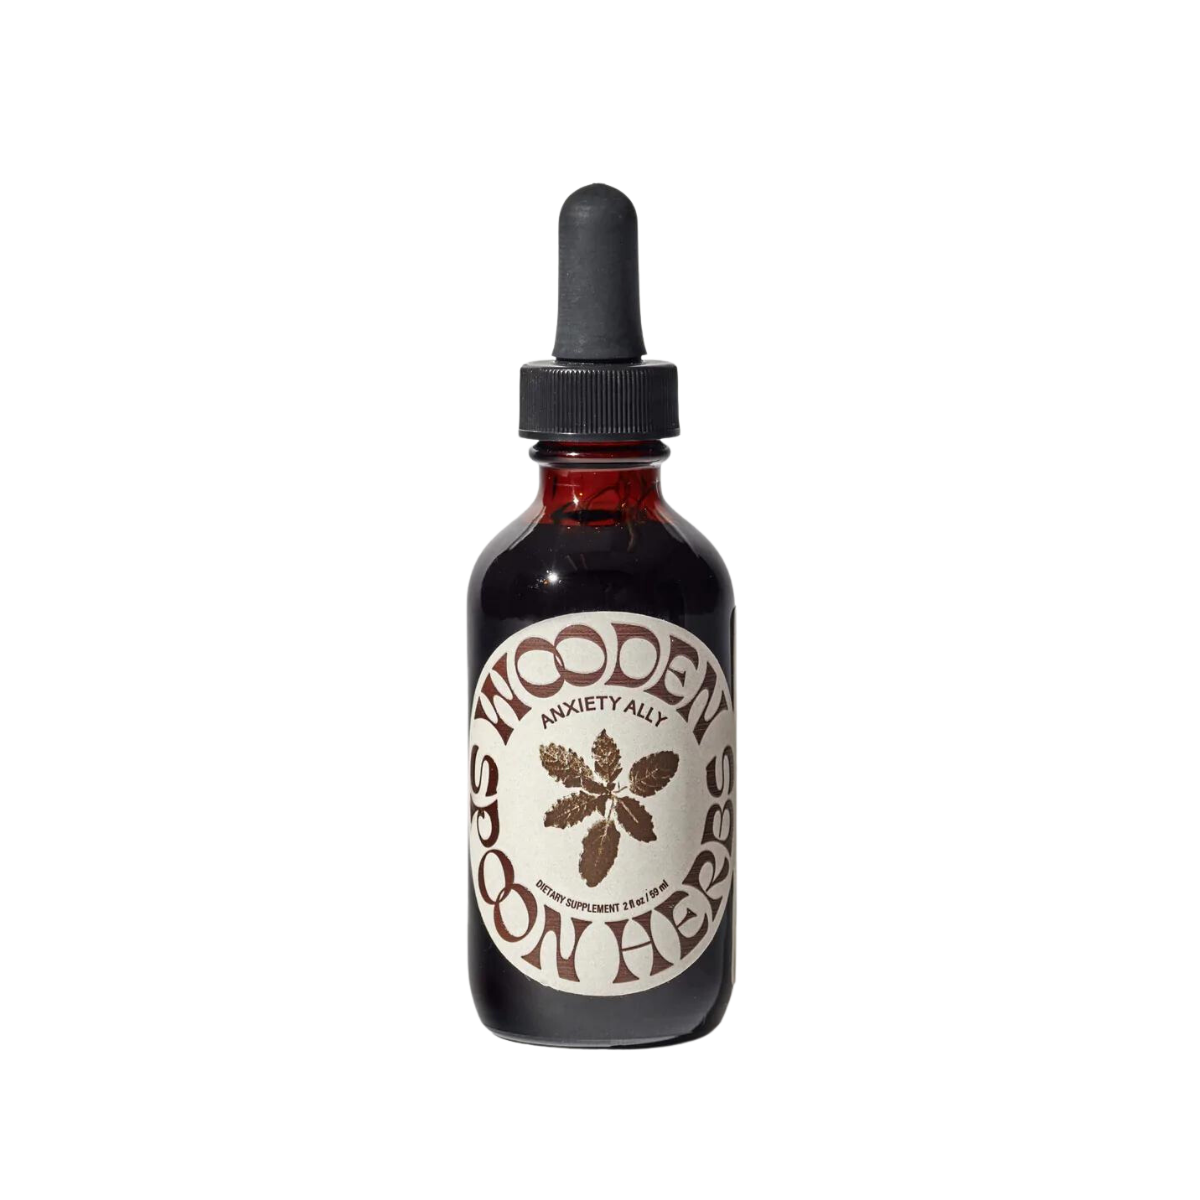 Wooden Spoon Herbs Anxiety Ally Tincture